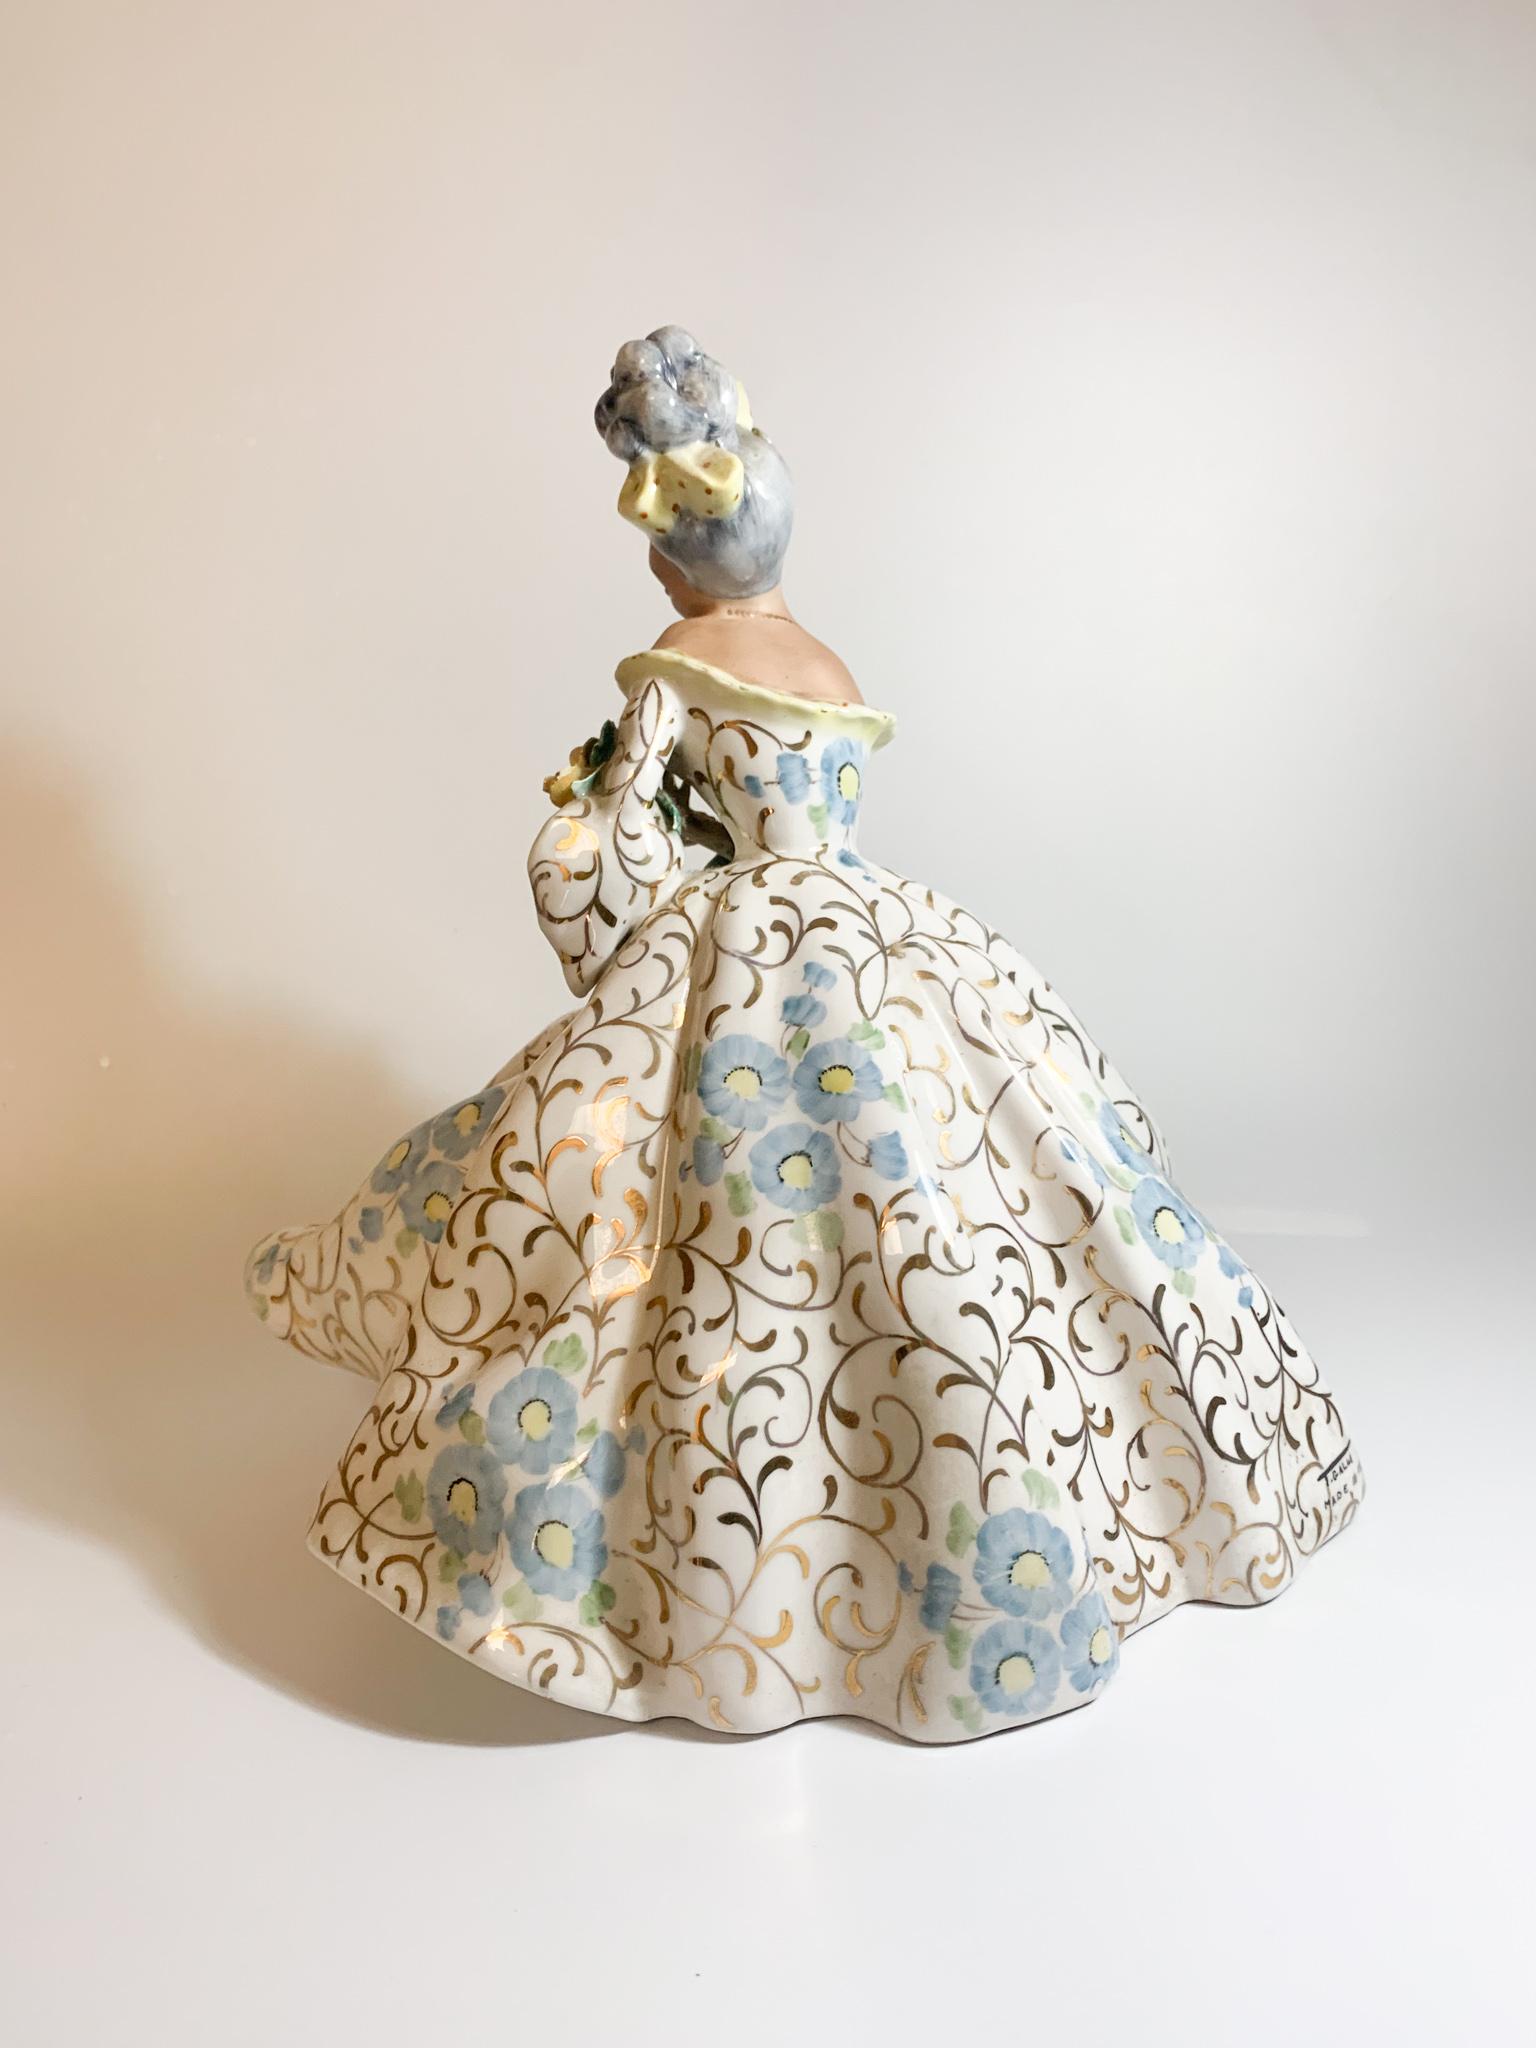 Ceramic Statue of a Lady with Iridescent Details by Tiziano Galli from the 1950s For Sale 1